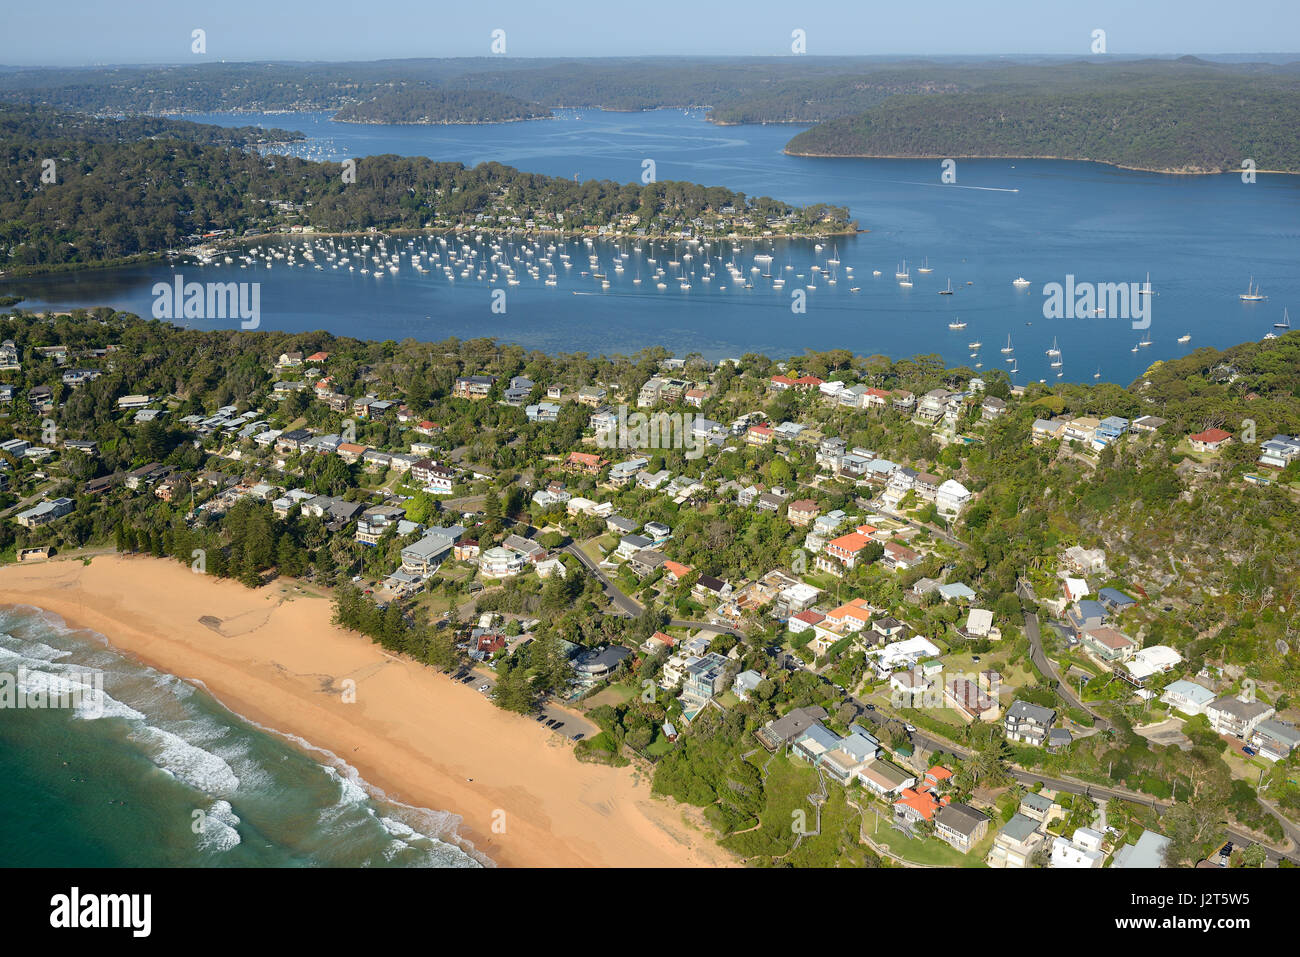 AERIAL VIEW. Beachside city between the Ocean Pacific and a ria (a drowned river valley). Whale Beach, Sydney, New South Wales, Australia. Stock Photo